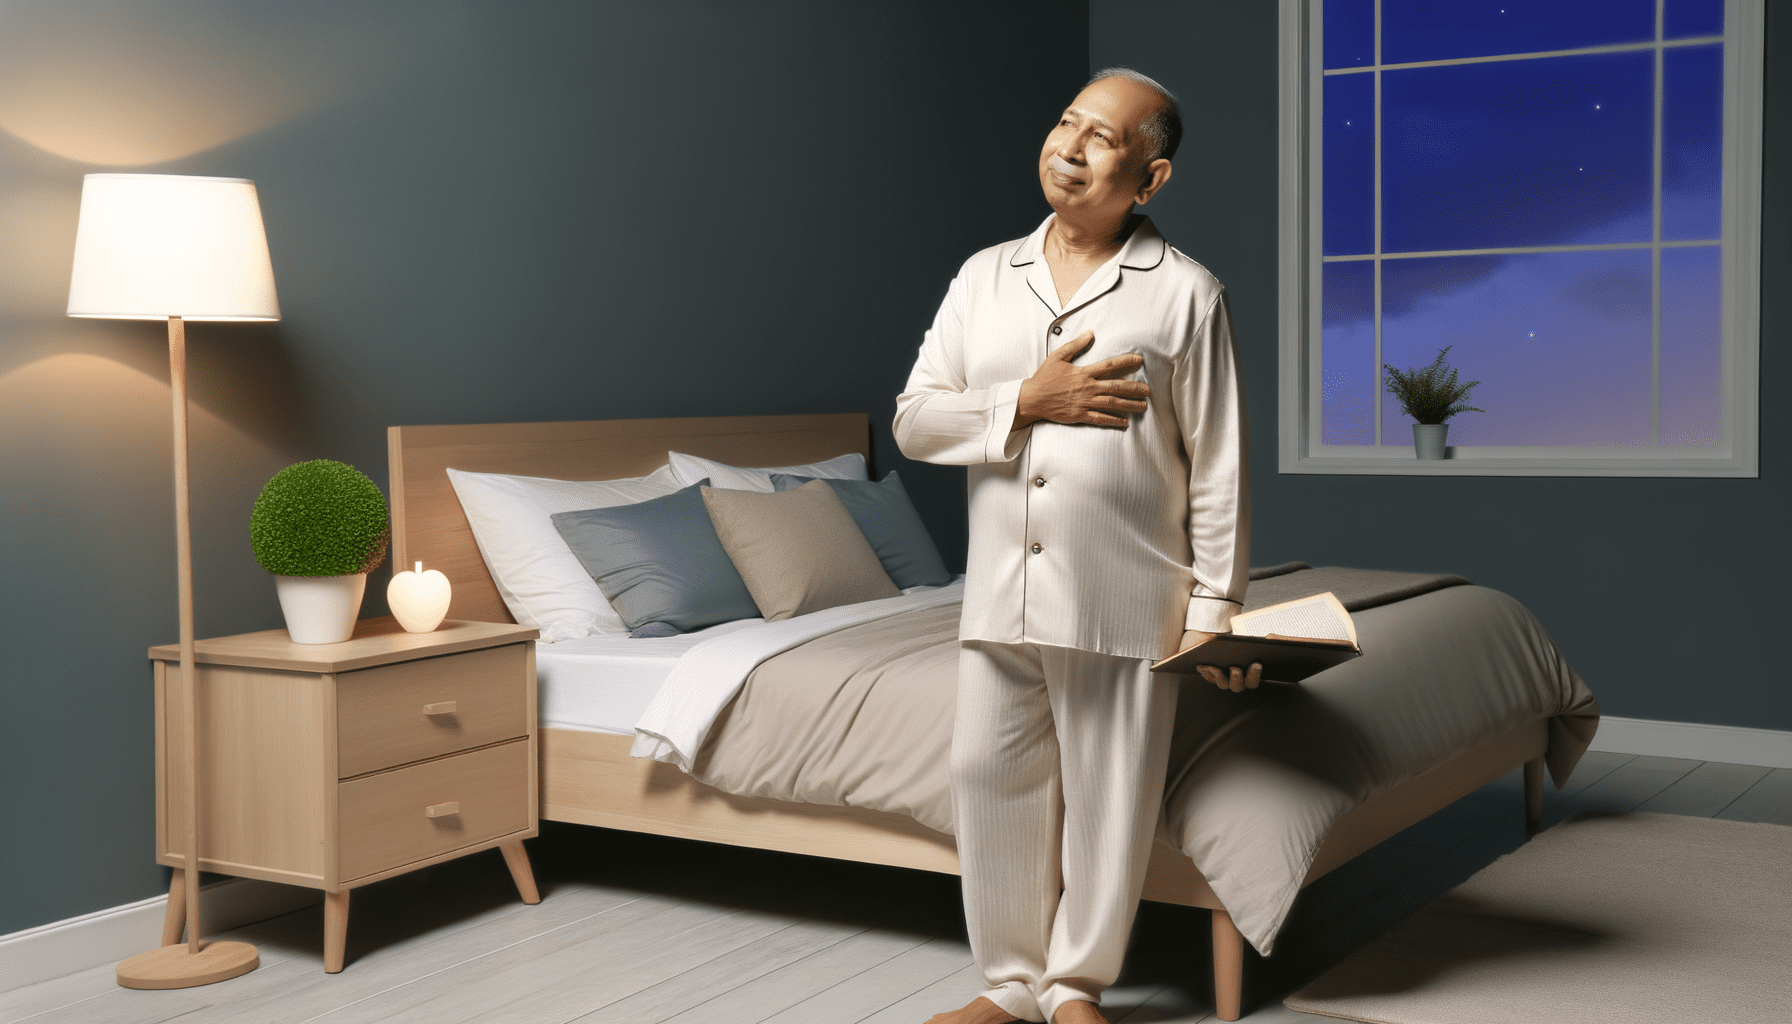 Senior Sleep Science: How to Maintain Restful Nights as You Age